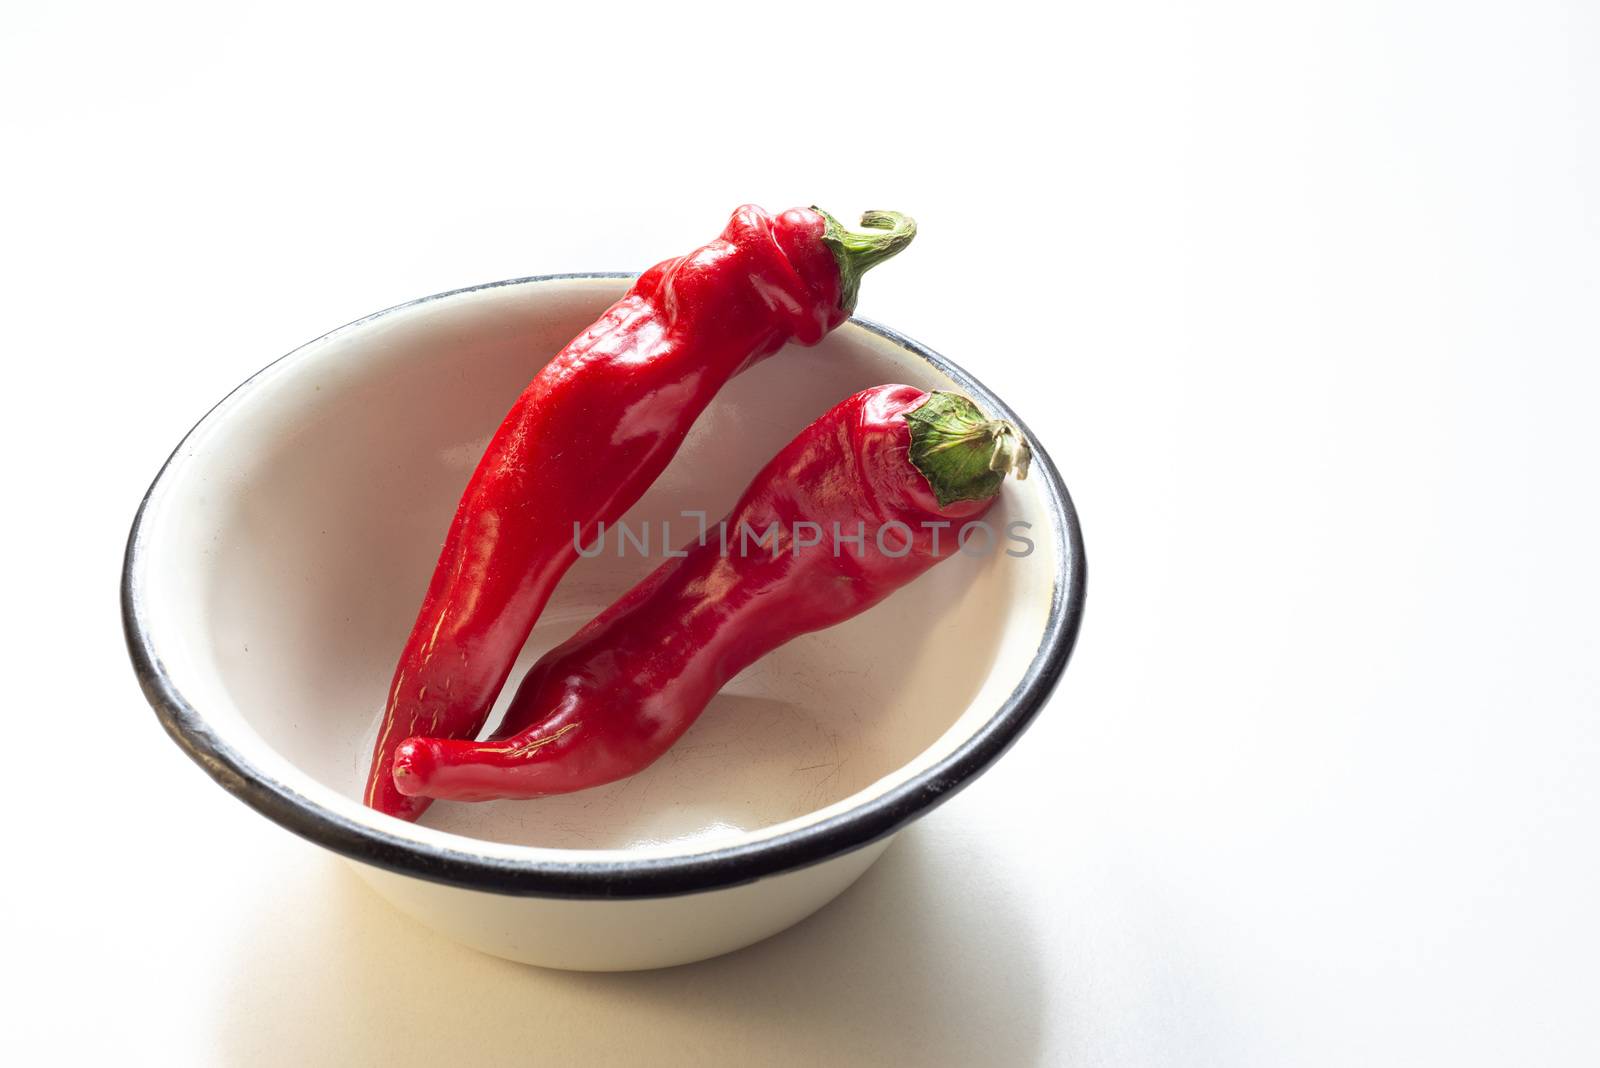 Hot red chili peppers in an enamel bowl put on a white background